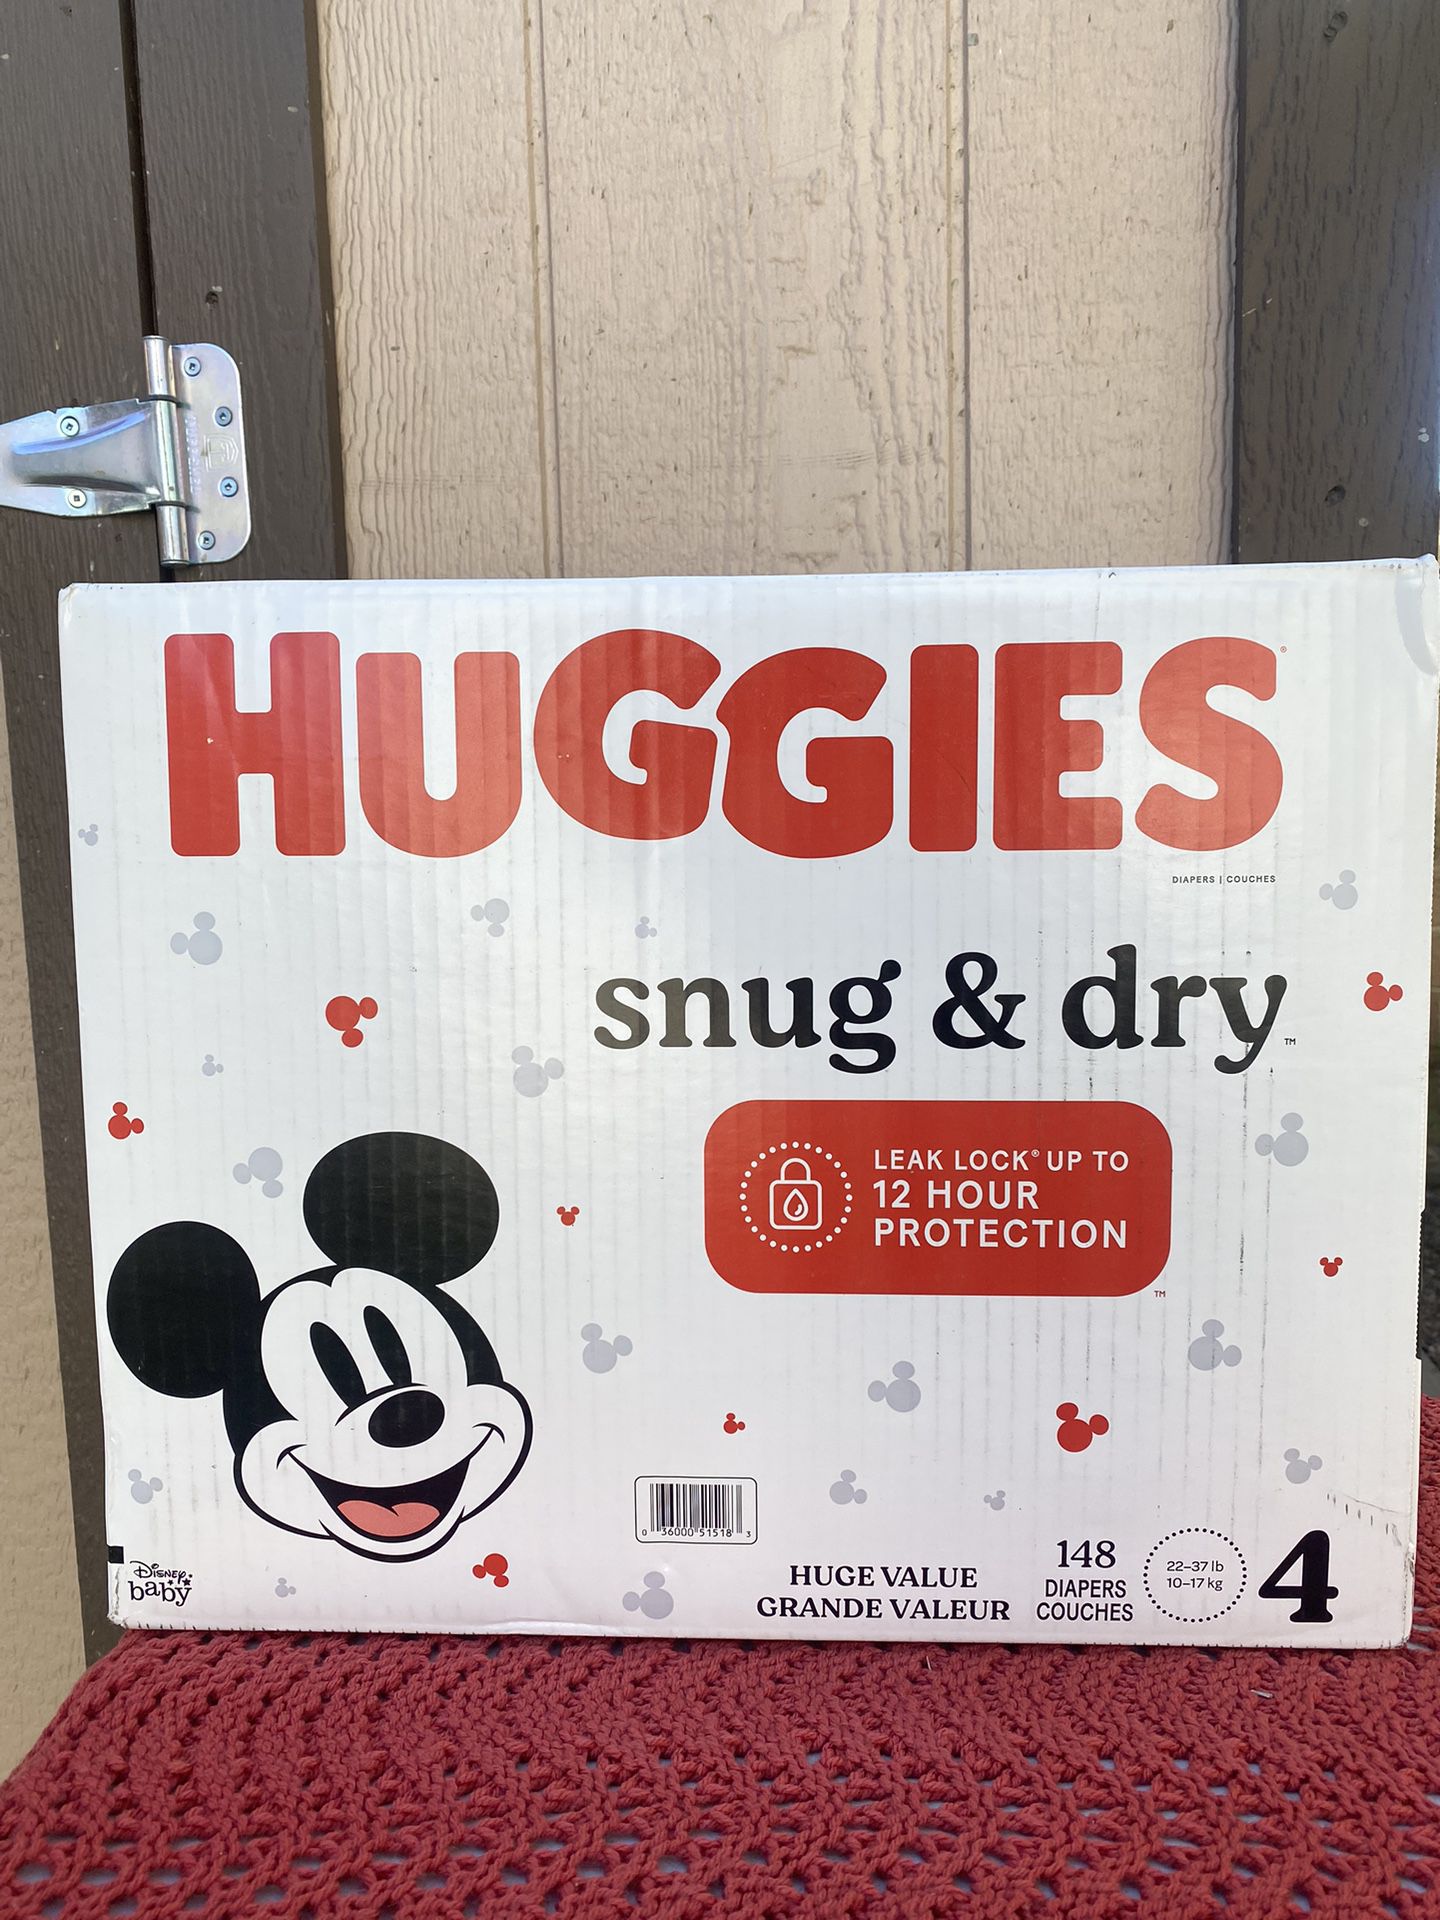 Huggies Size 4📍NO DELIVERY📍